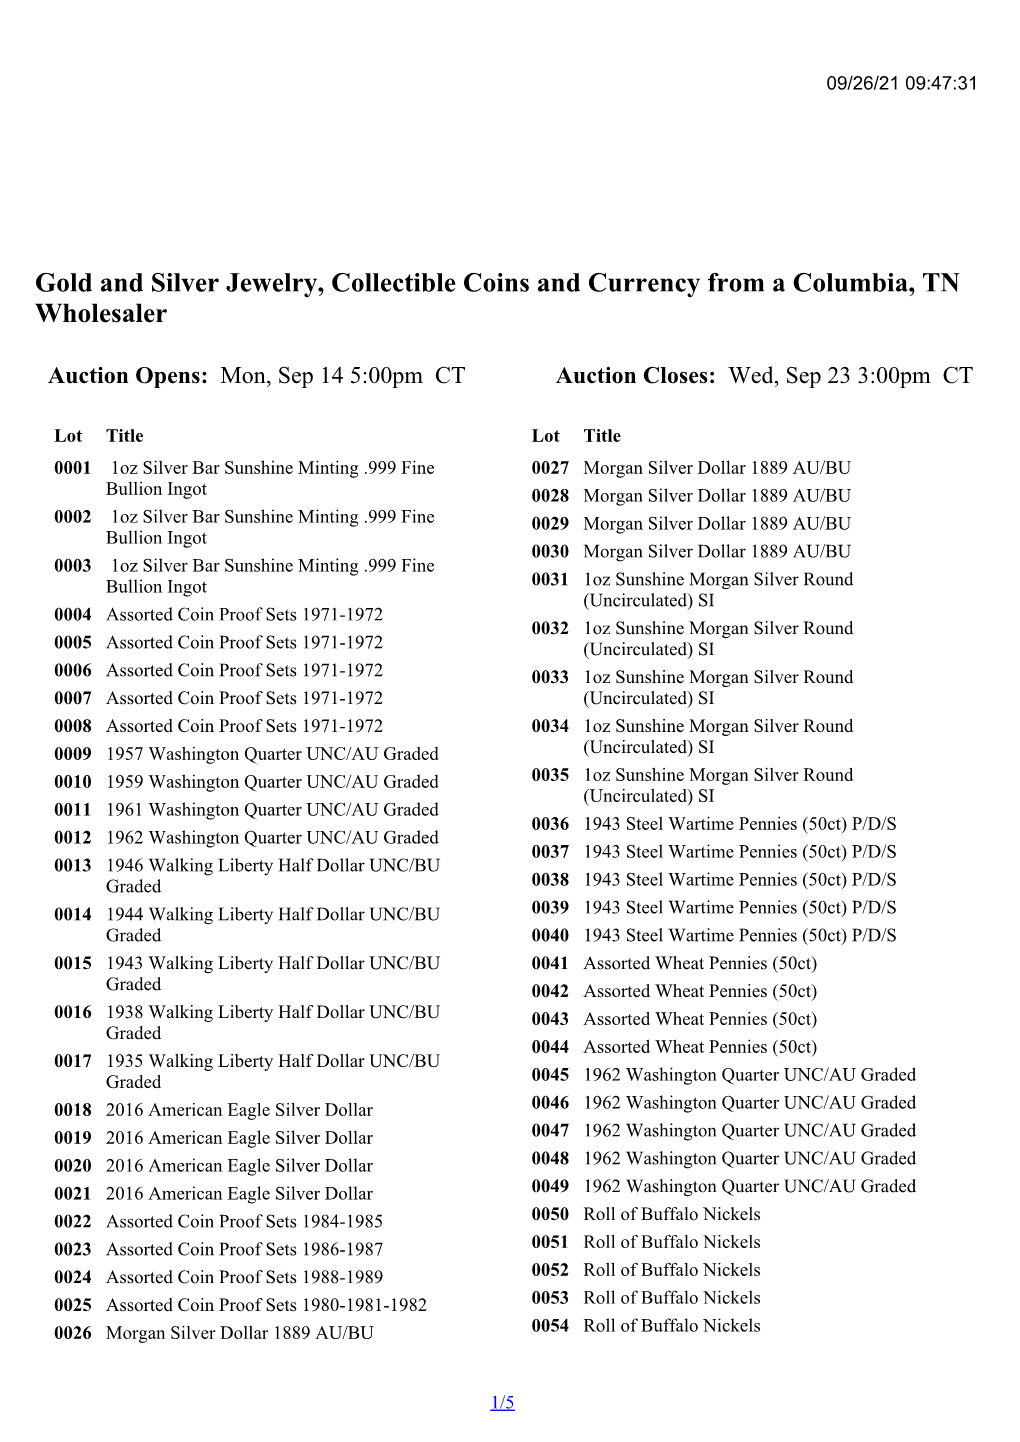 Gold and Silver Jewelry, Collectible Coins and Currency from a Columbia, TN Wholesaler